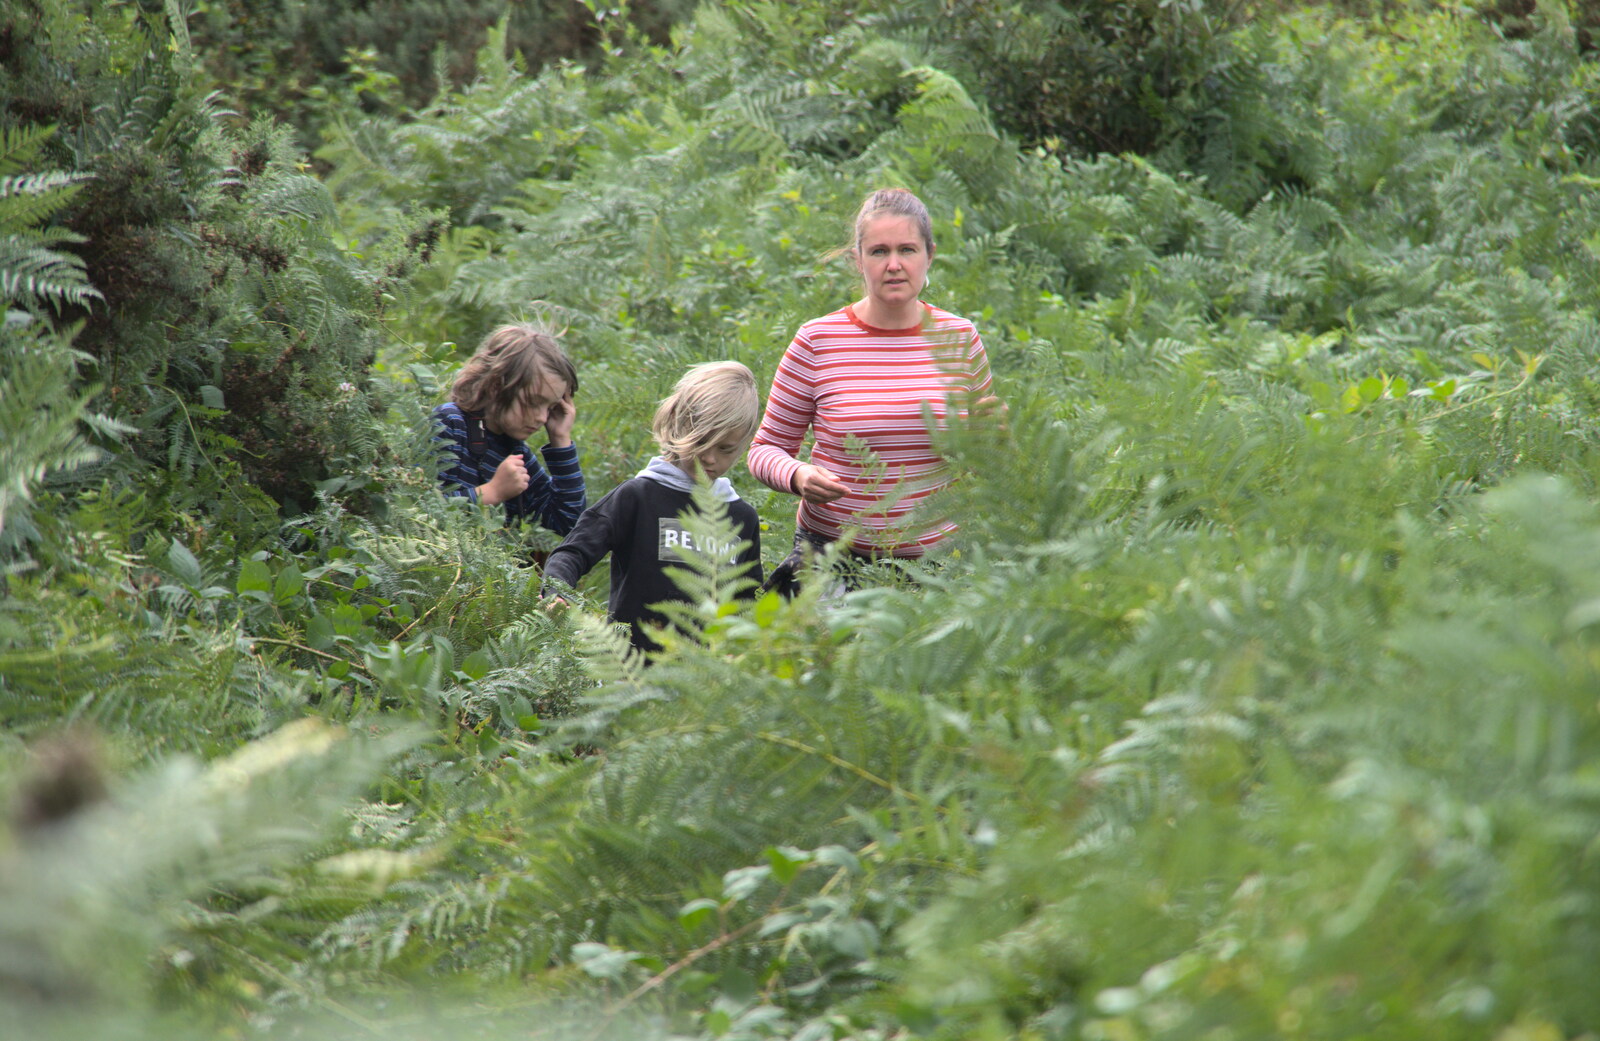 The gang in the bracken from A Game of Cricket, and a Walk Around Chagford, Devon - 23rd August 2020